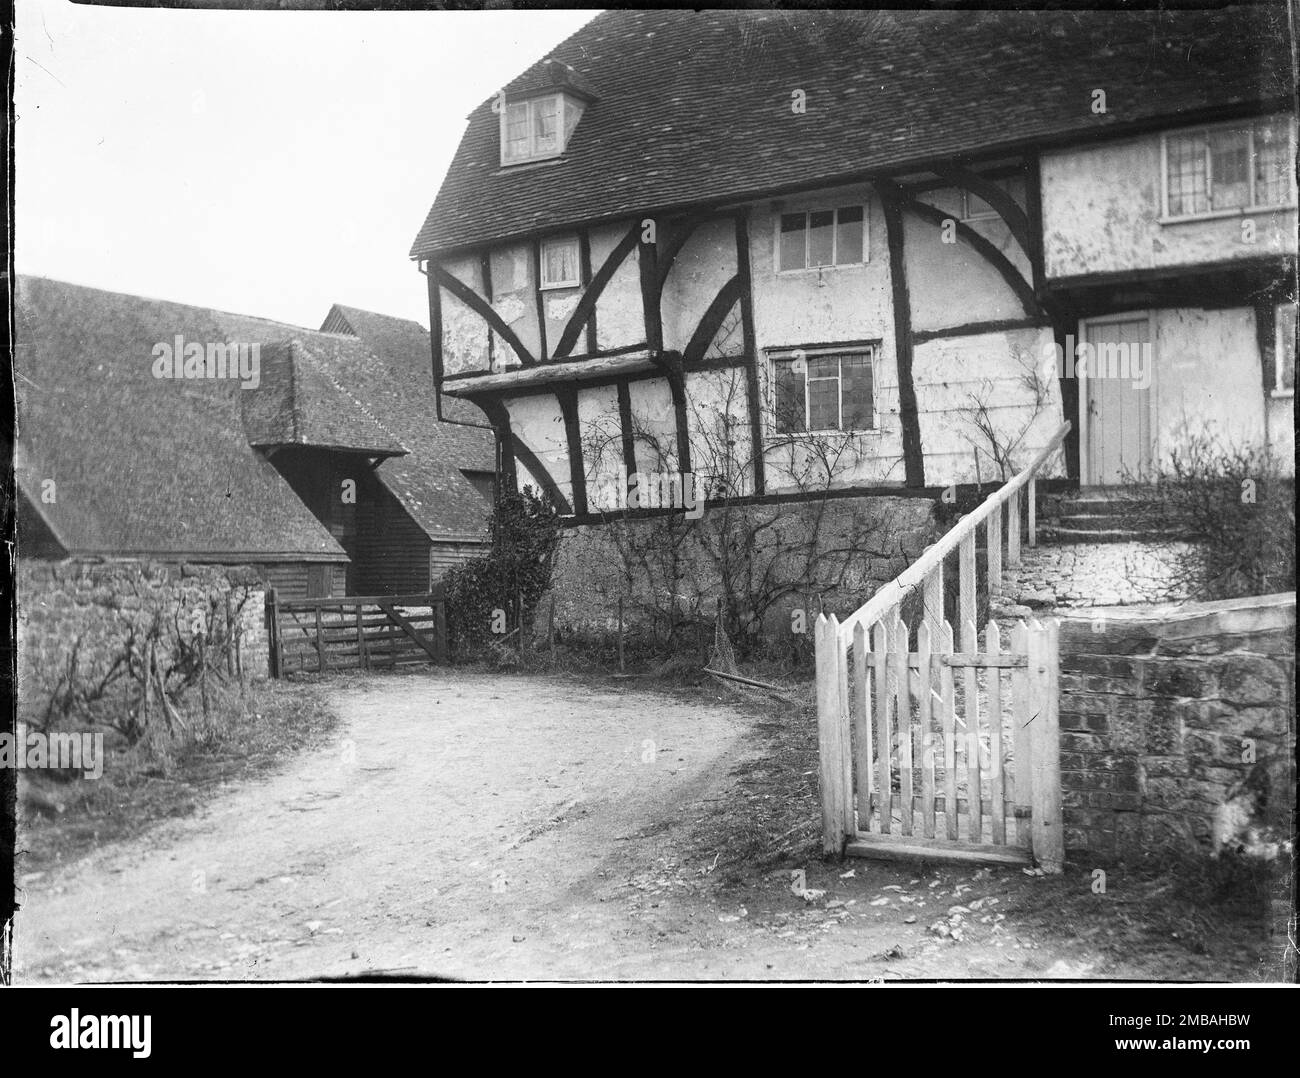 Roses Manor Farm, Broomfield Road, Lower Broomfield, Broomfield and Kingswood, Maidstone, Kent, 1904. A view of Roses Farm from the garden gate, showing a Wealden House in the foreground and a weatherboarded barn to its north. The house at Roses Farm is a Wealden House built in the late 15th or early 16th century. To its north is a timber framed and weatherboard barn built in the 18th century or earlier, subsequently converted to a residential building called Fairview Barn. Stock Photo